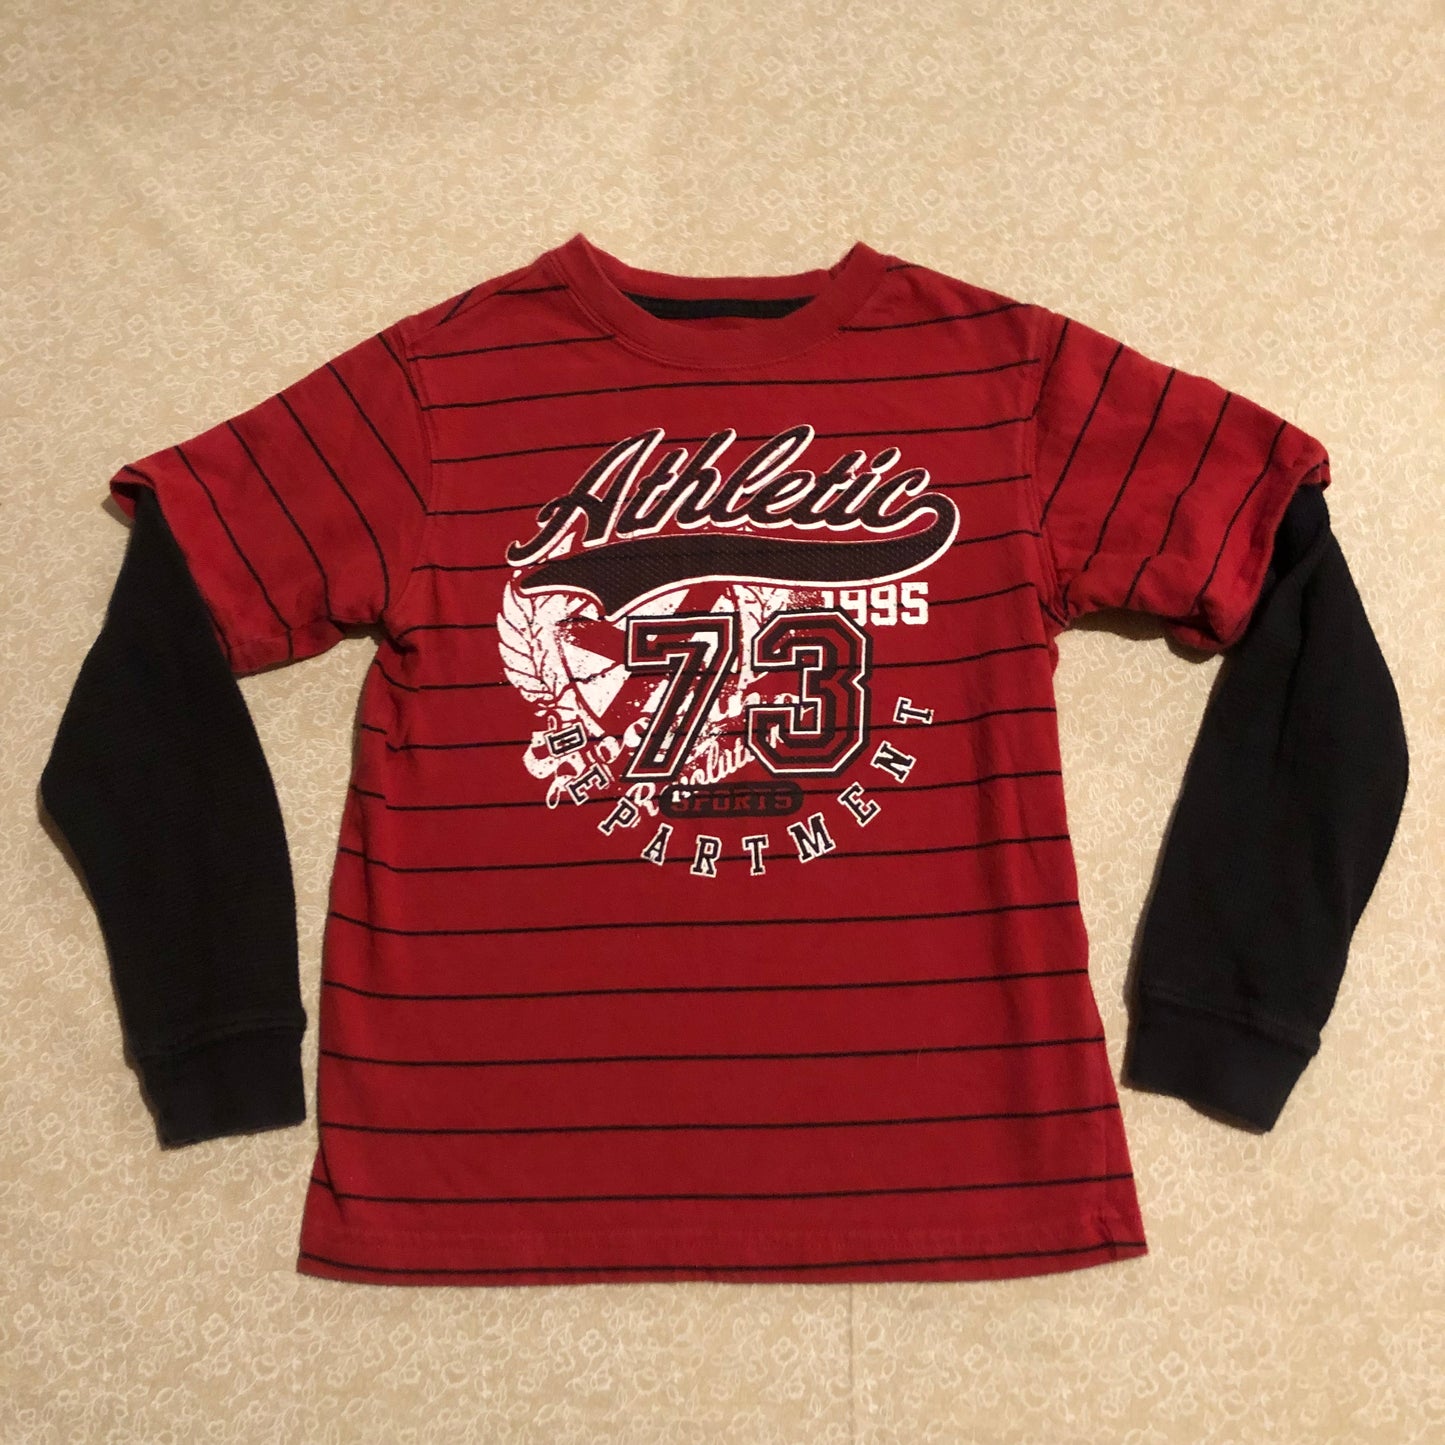 7-shirt-toughskins-red-athletic